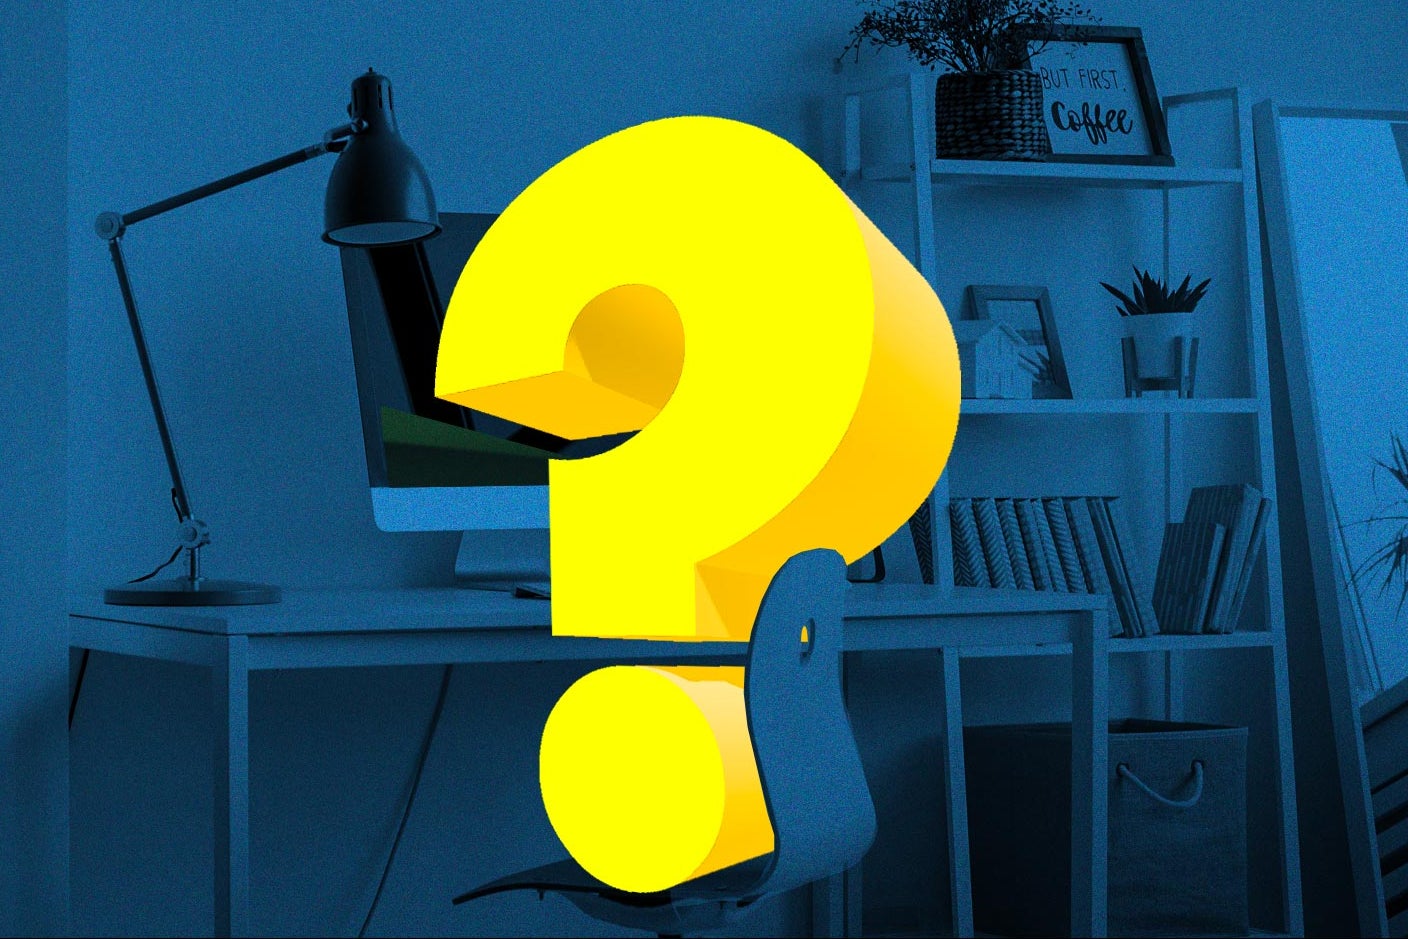 Giant yellow question mark sitting at a computer desk reading the laptop.